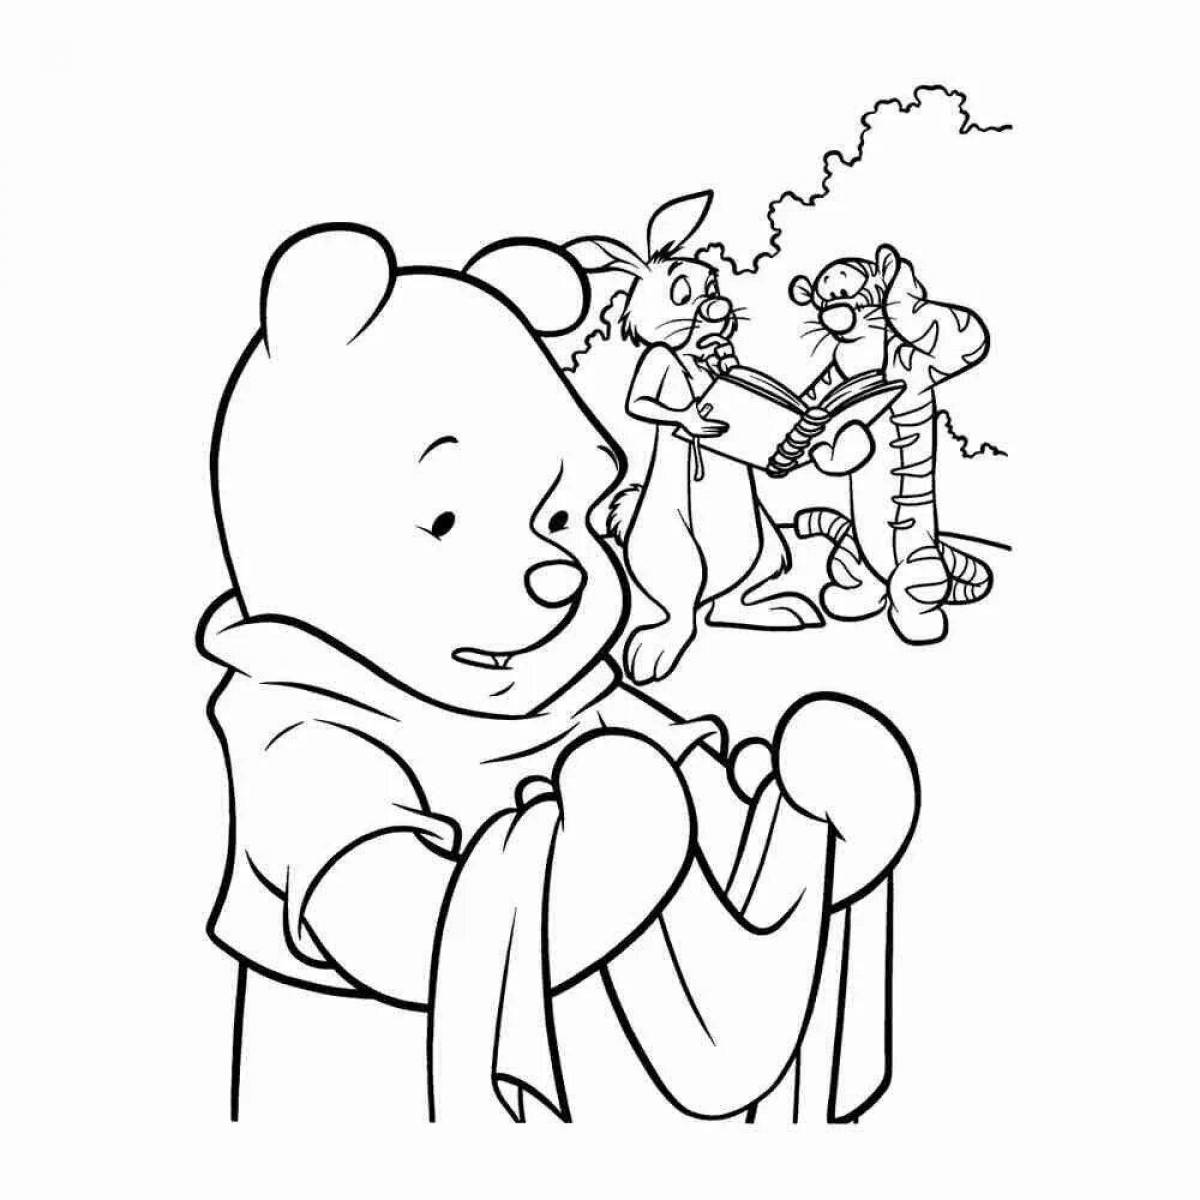 Winnie the pooh and his friends #5